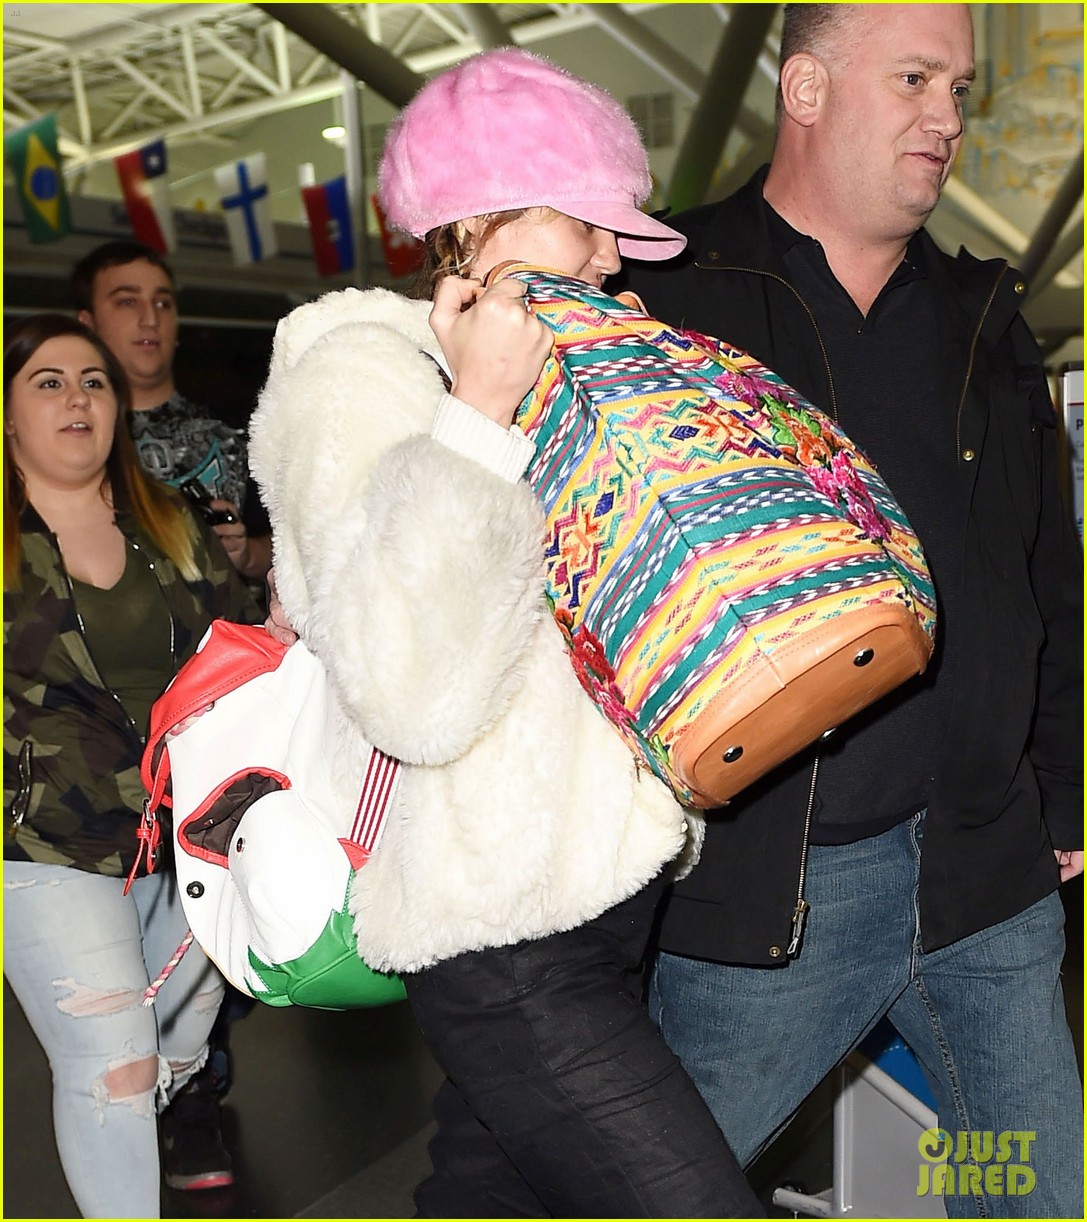 miley cyrus wears ring at airport 12